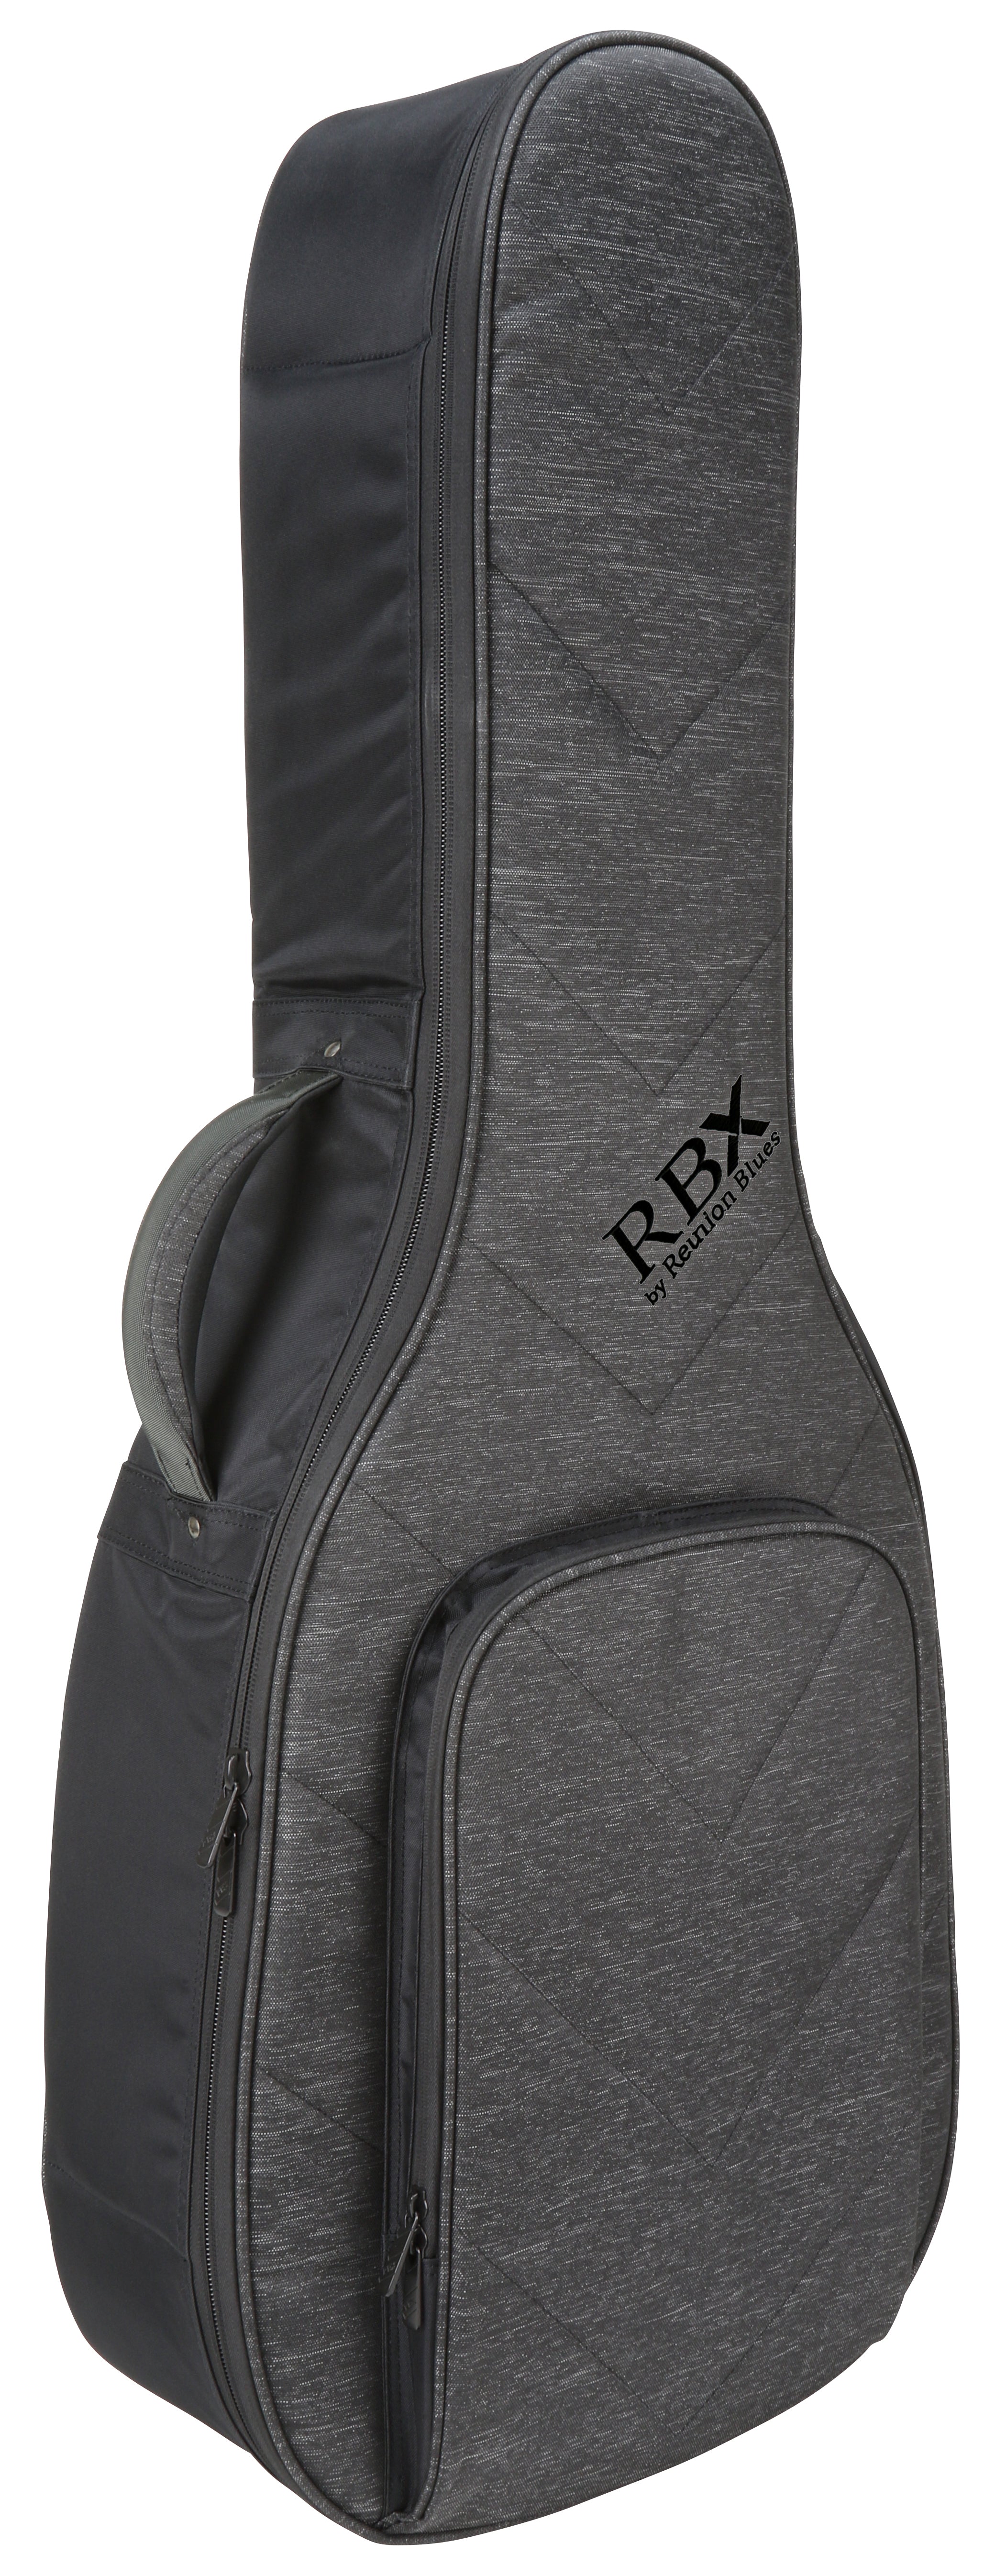 RBX Oxford Small Body Acoustic Guitar Bag - Angle